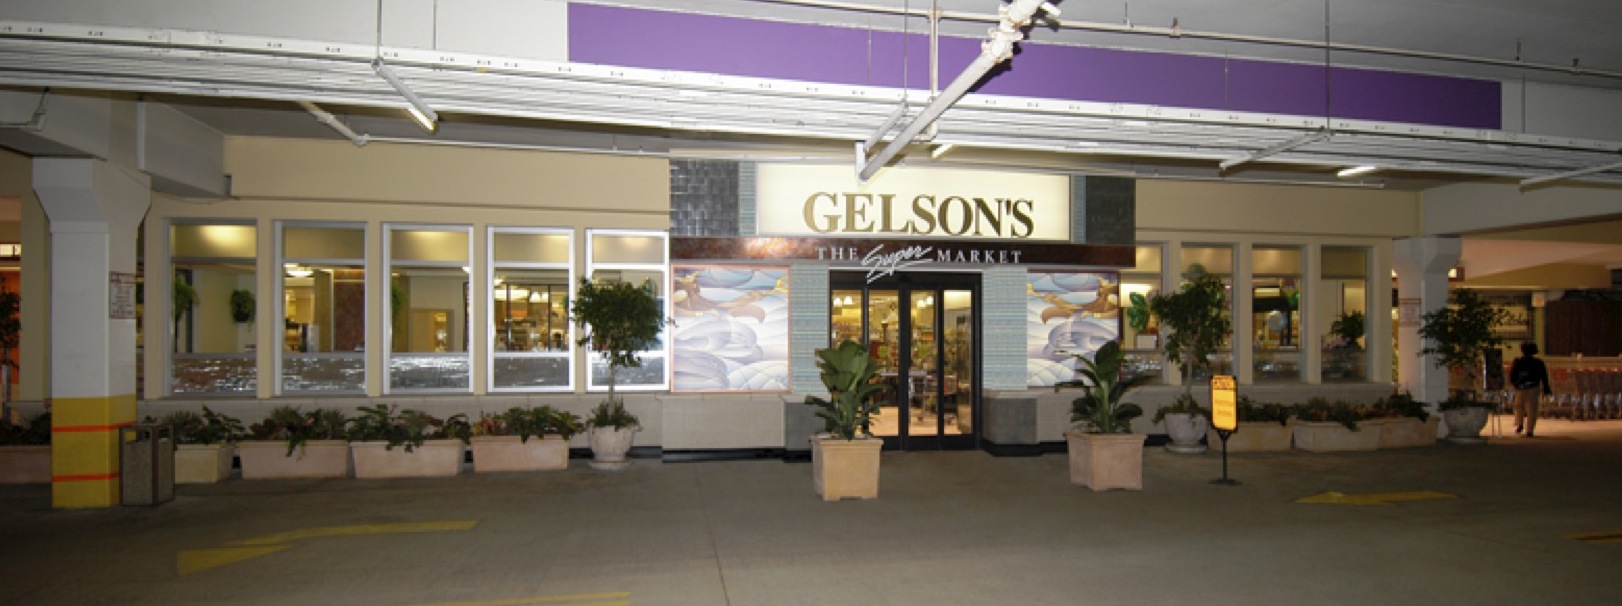 For Gelsons Market in Los Angeles (pictured above), the architect was able to p